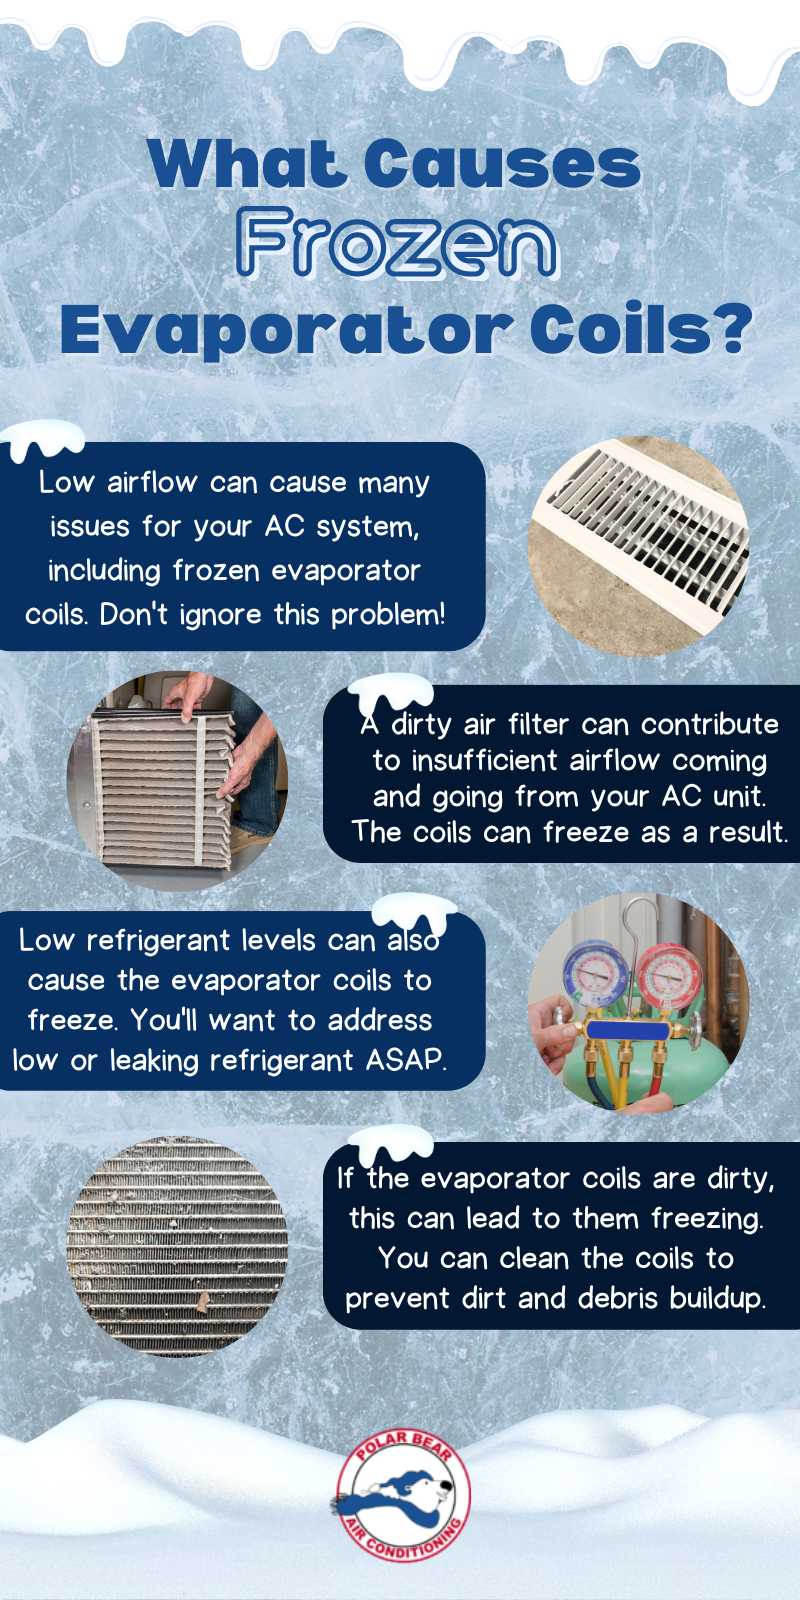 What Causes Evaporator Coils?

Low airflow can cause many issues for your AC system, including frozen evaporator coils. Don't ignore this problem!
A dirty air filter can contribute to insufficient airflow coming and going from your AC unit. The coils can freeze as a result.
Low refrigerant levels can also cause the evaporator coils to freeze. You'll want to address low or leaking refrigerant ASAP.
If the evaporator coils are dirty, this can lead to them freezing. You can clean the coils to prevent dirt and debris buildup.
